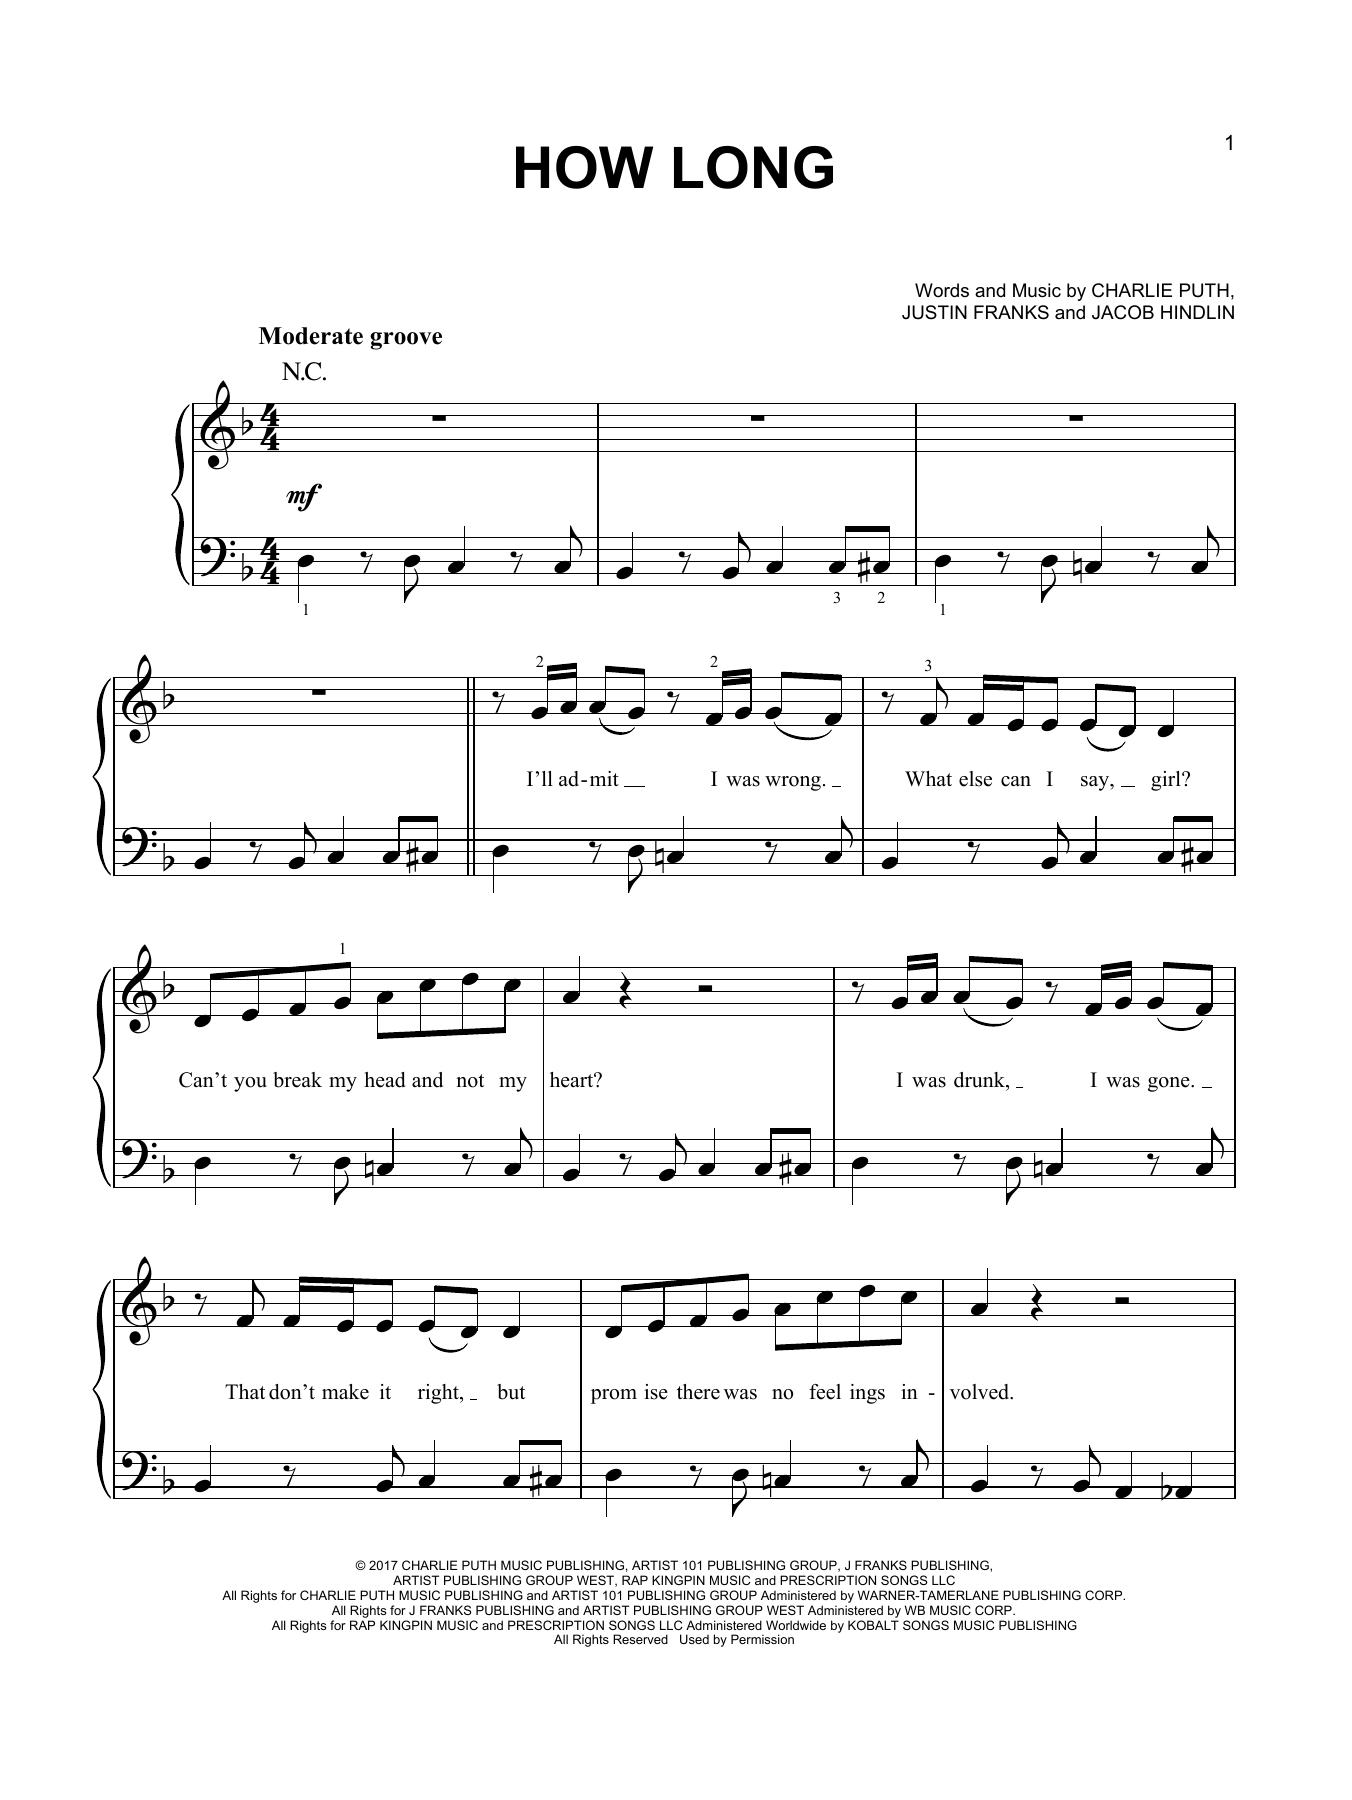 Download Charlie Puth How Long Sheet Music